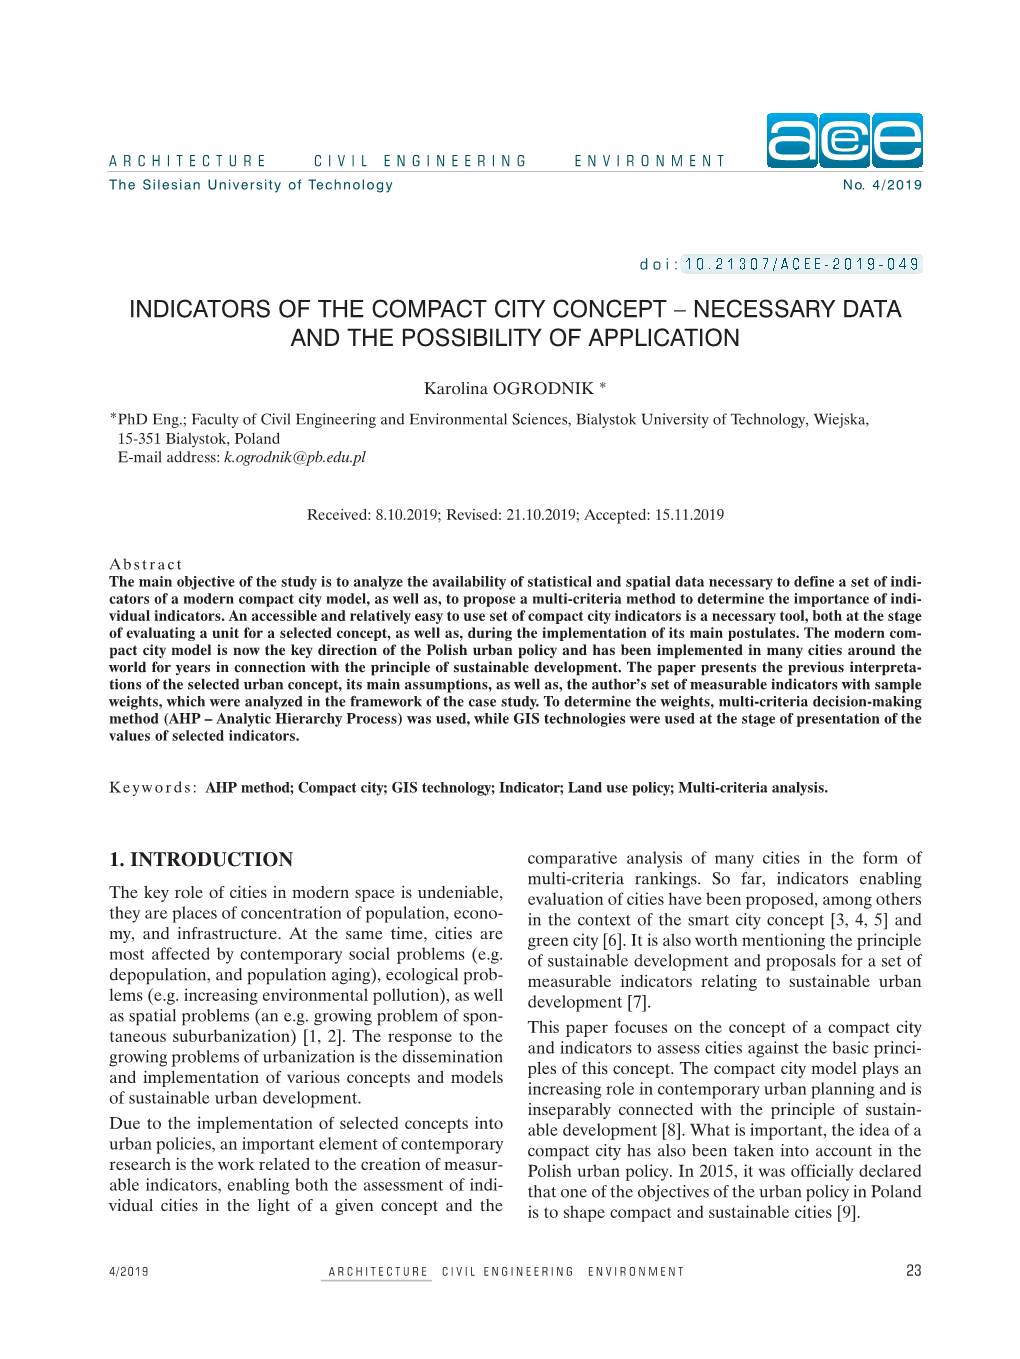 Indicators of the Compact City Concept – Necessary Data and the Possibility of Application